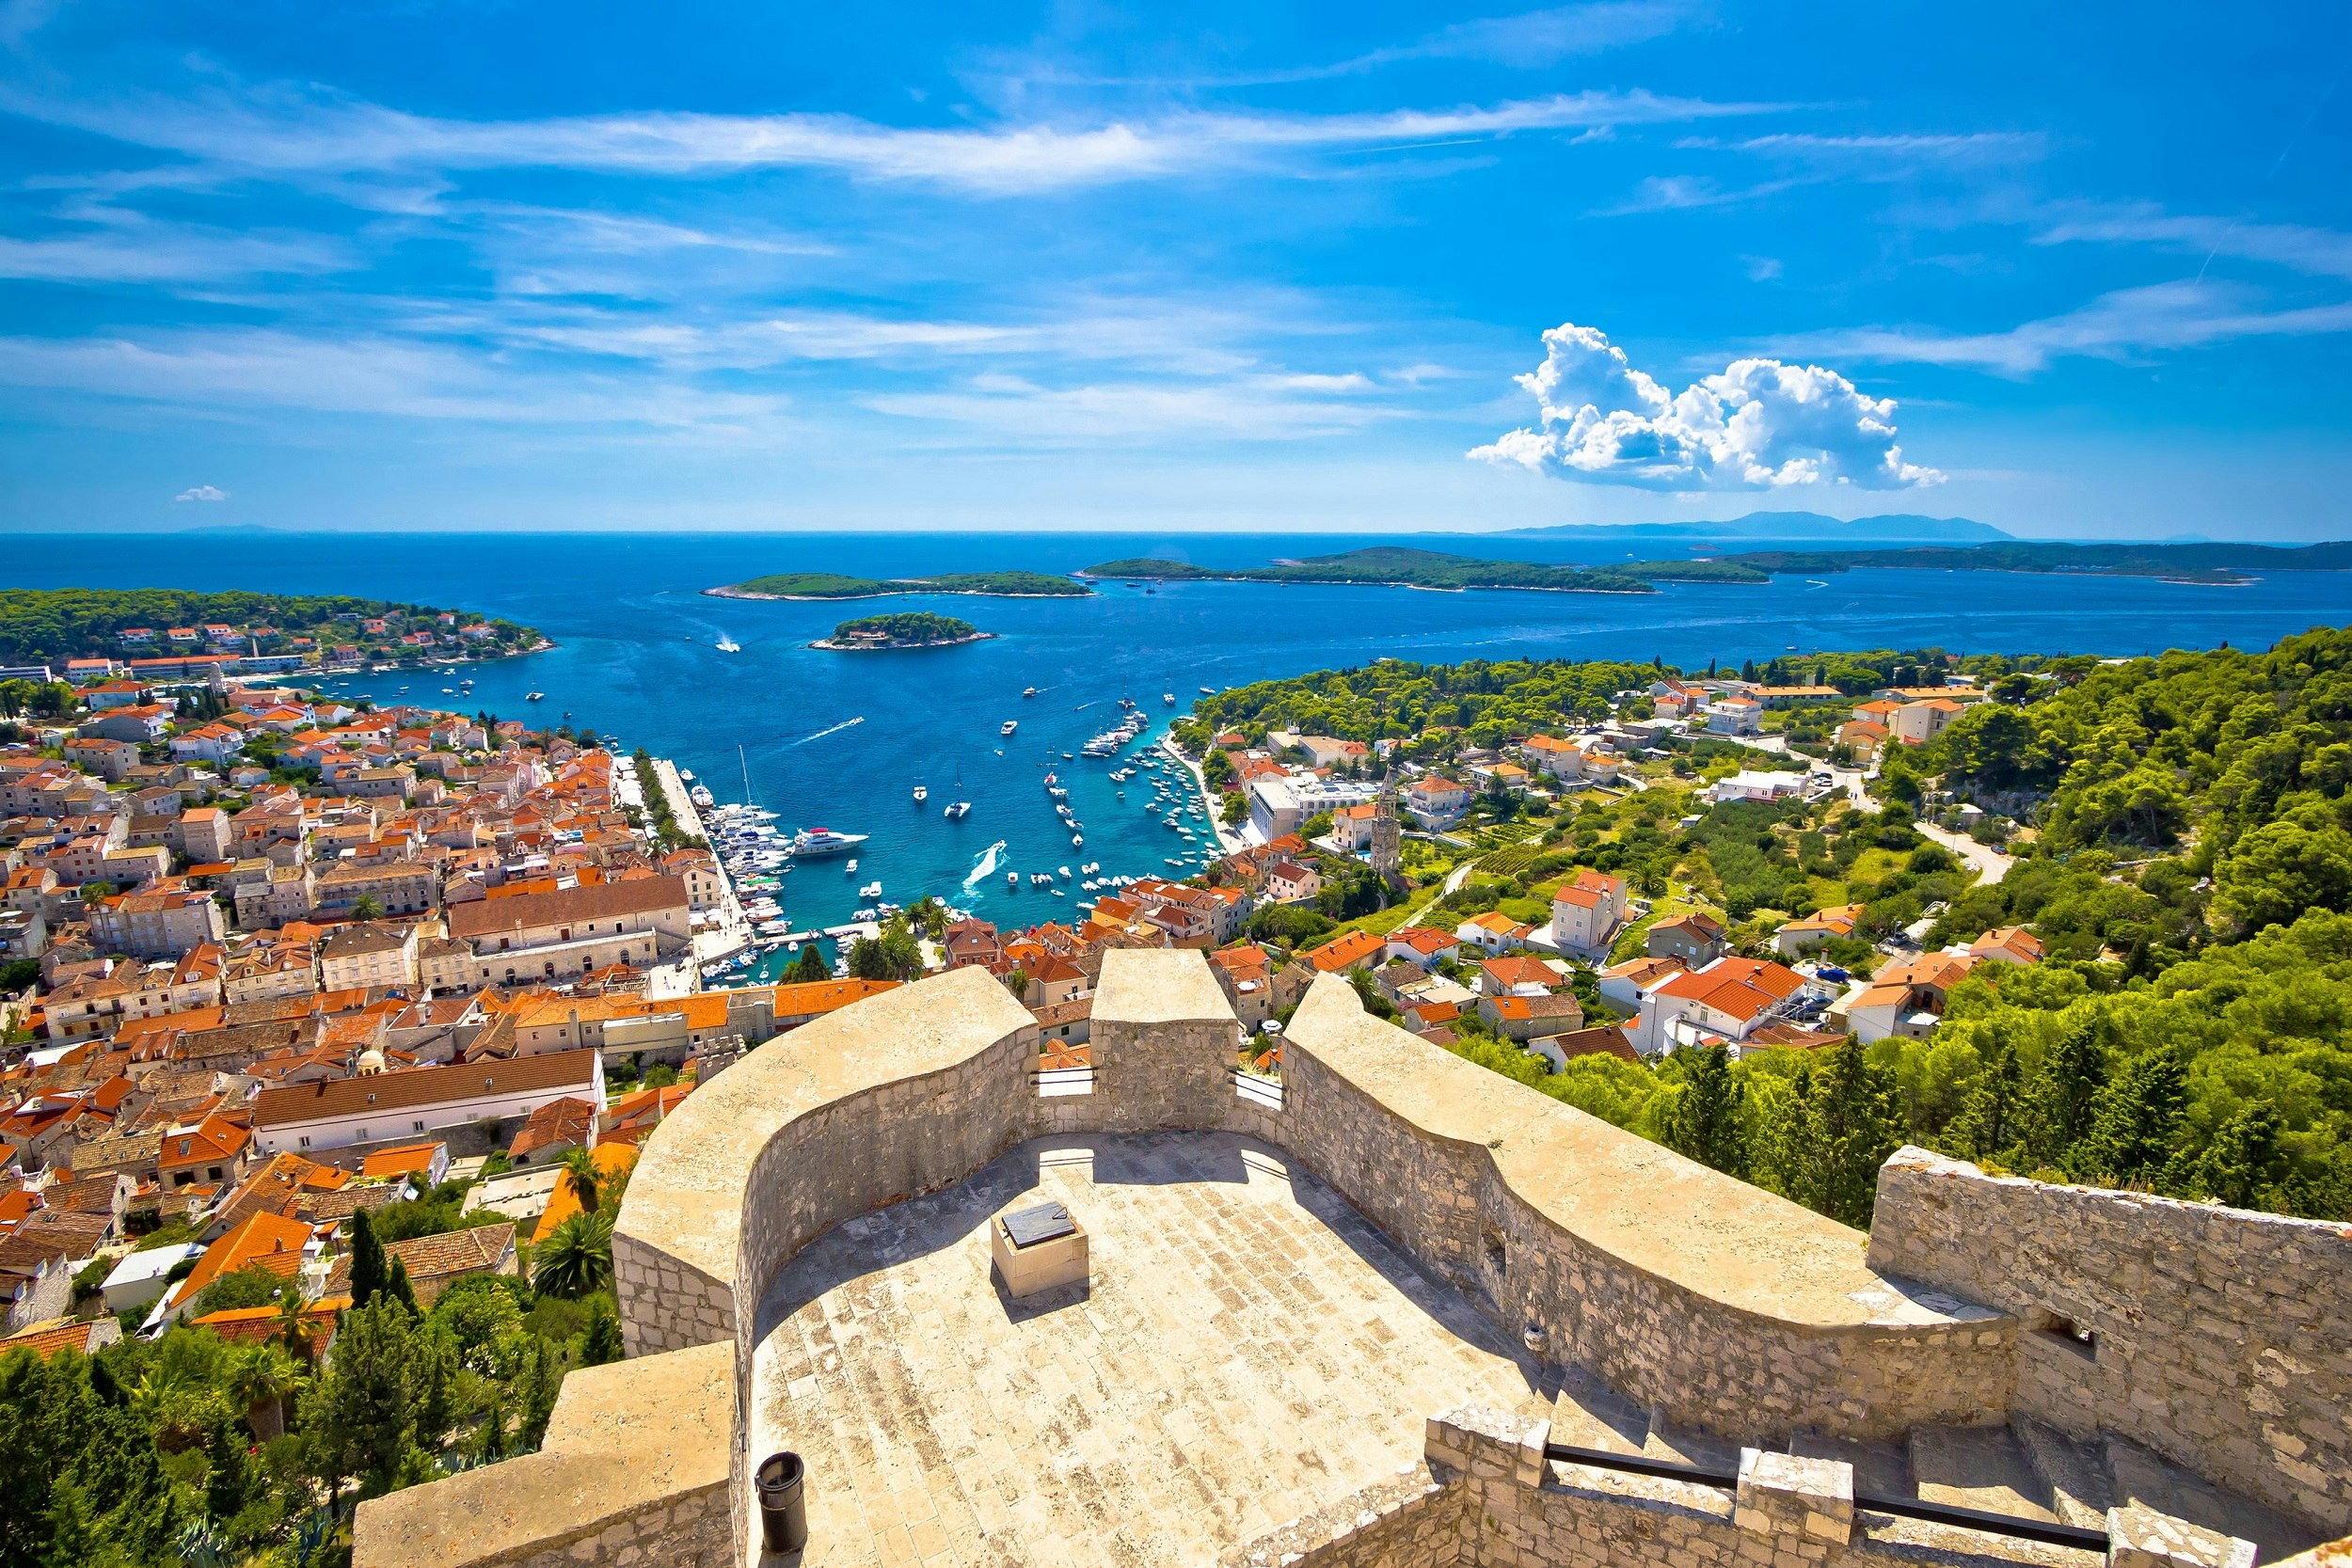 Fort battlements in the foreground give way to a view of the harbour, red roofs of the town and islands in the distance.